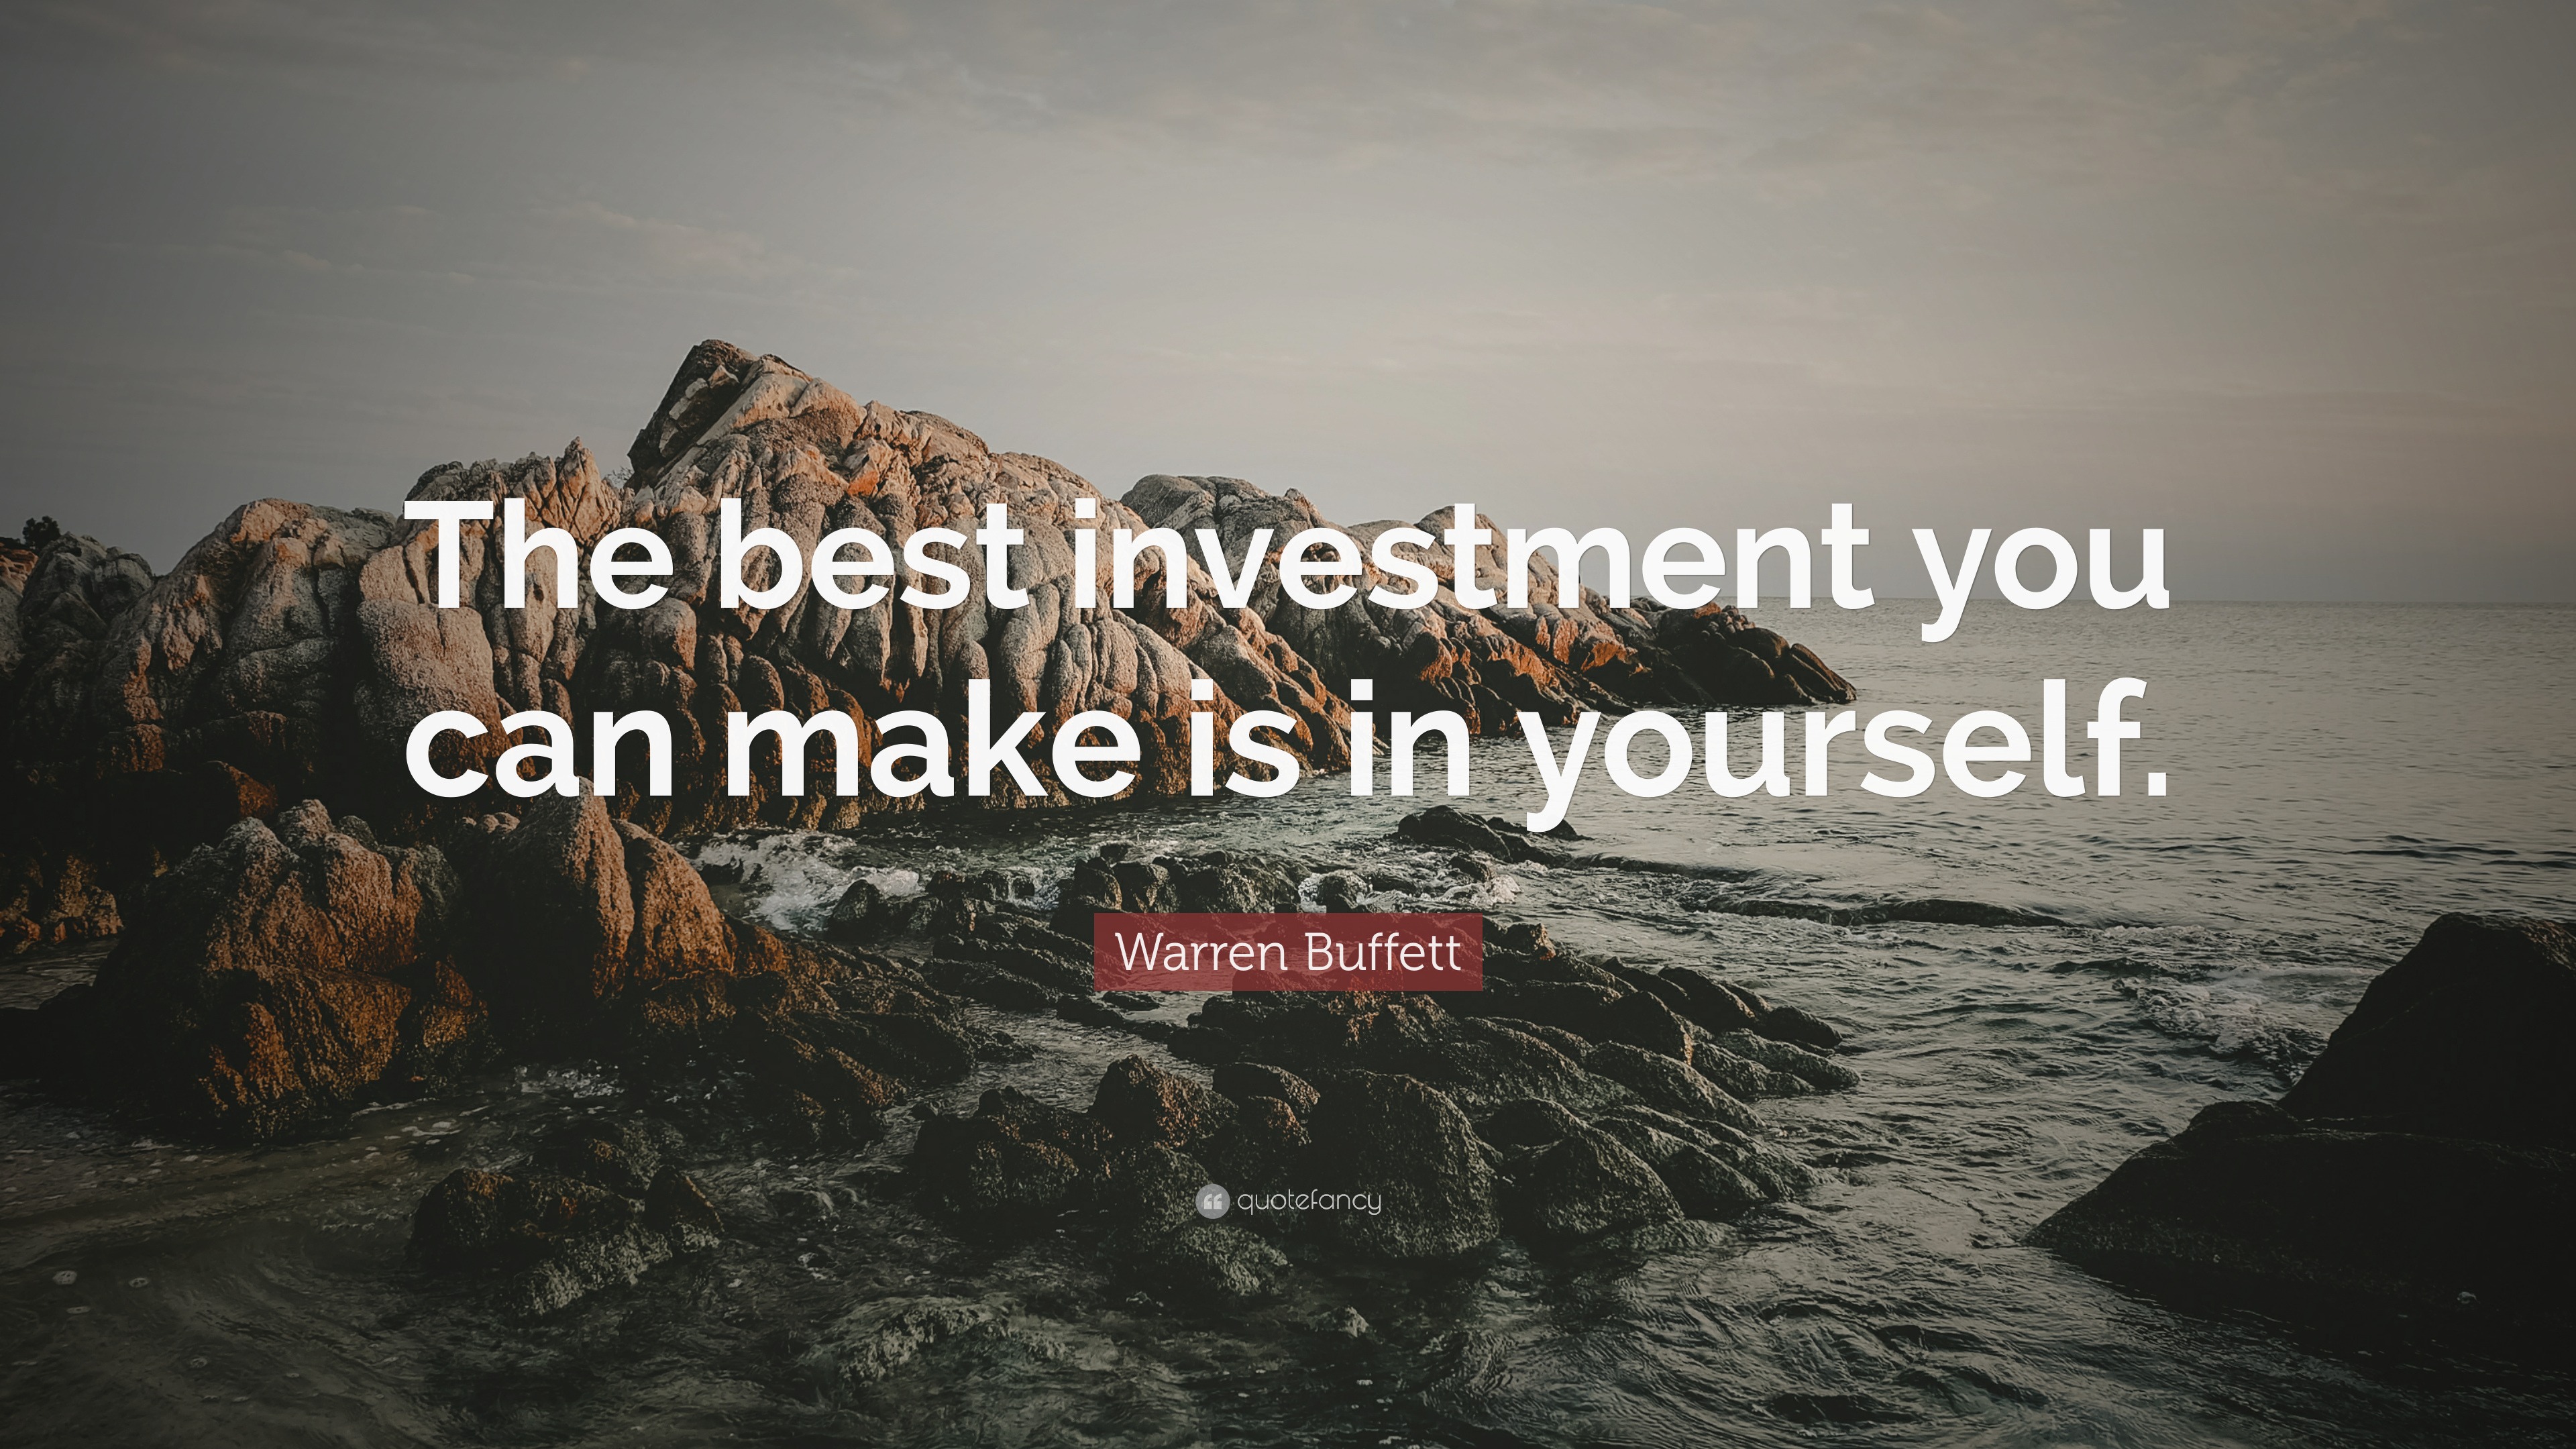 Warren Buffett Quote “The best investment you can make is in yourself.”